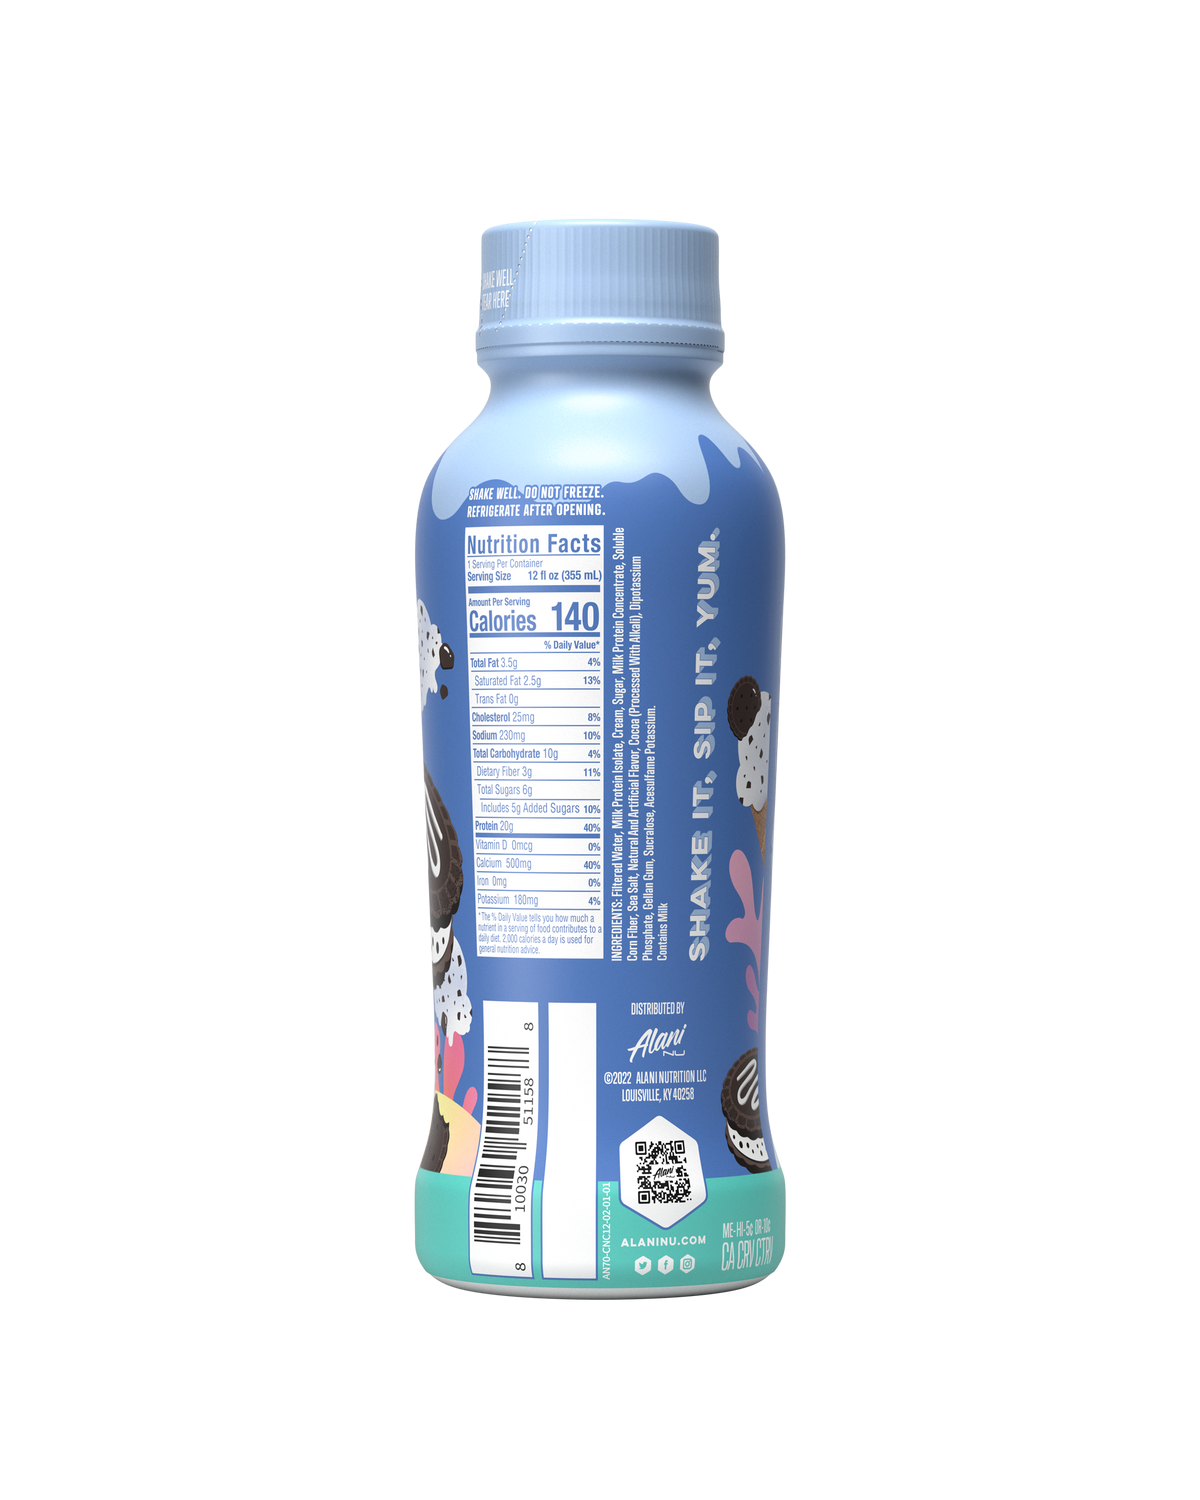 A back view of protein shake in Cookies &amp; Cream flavor showcasing nutrition facts.